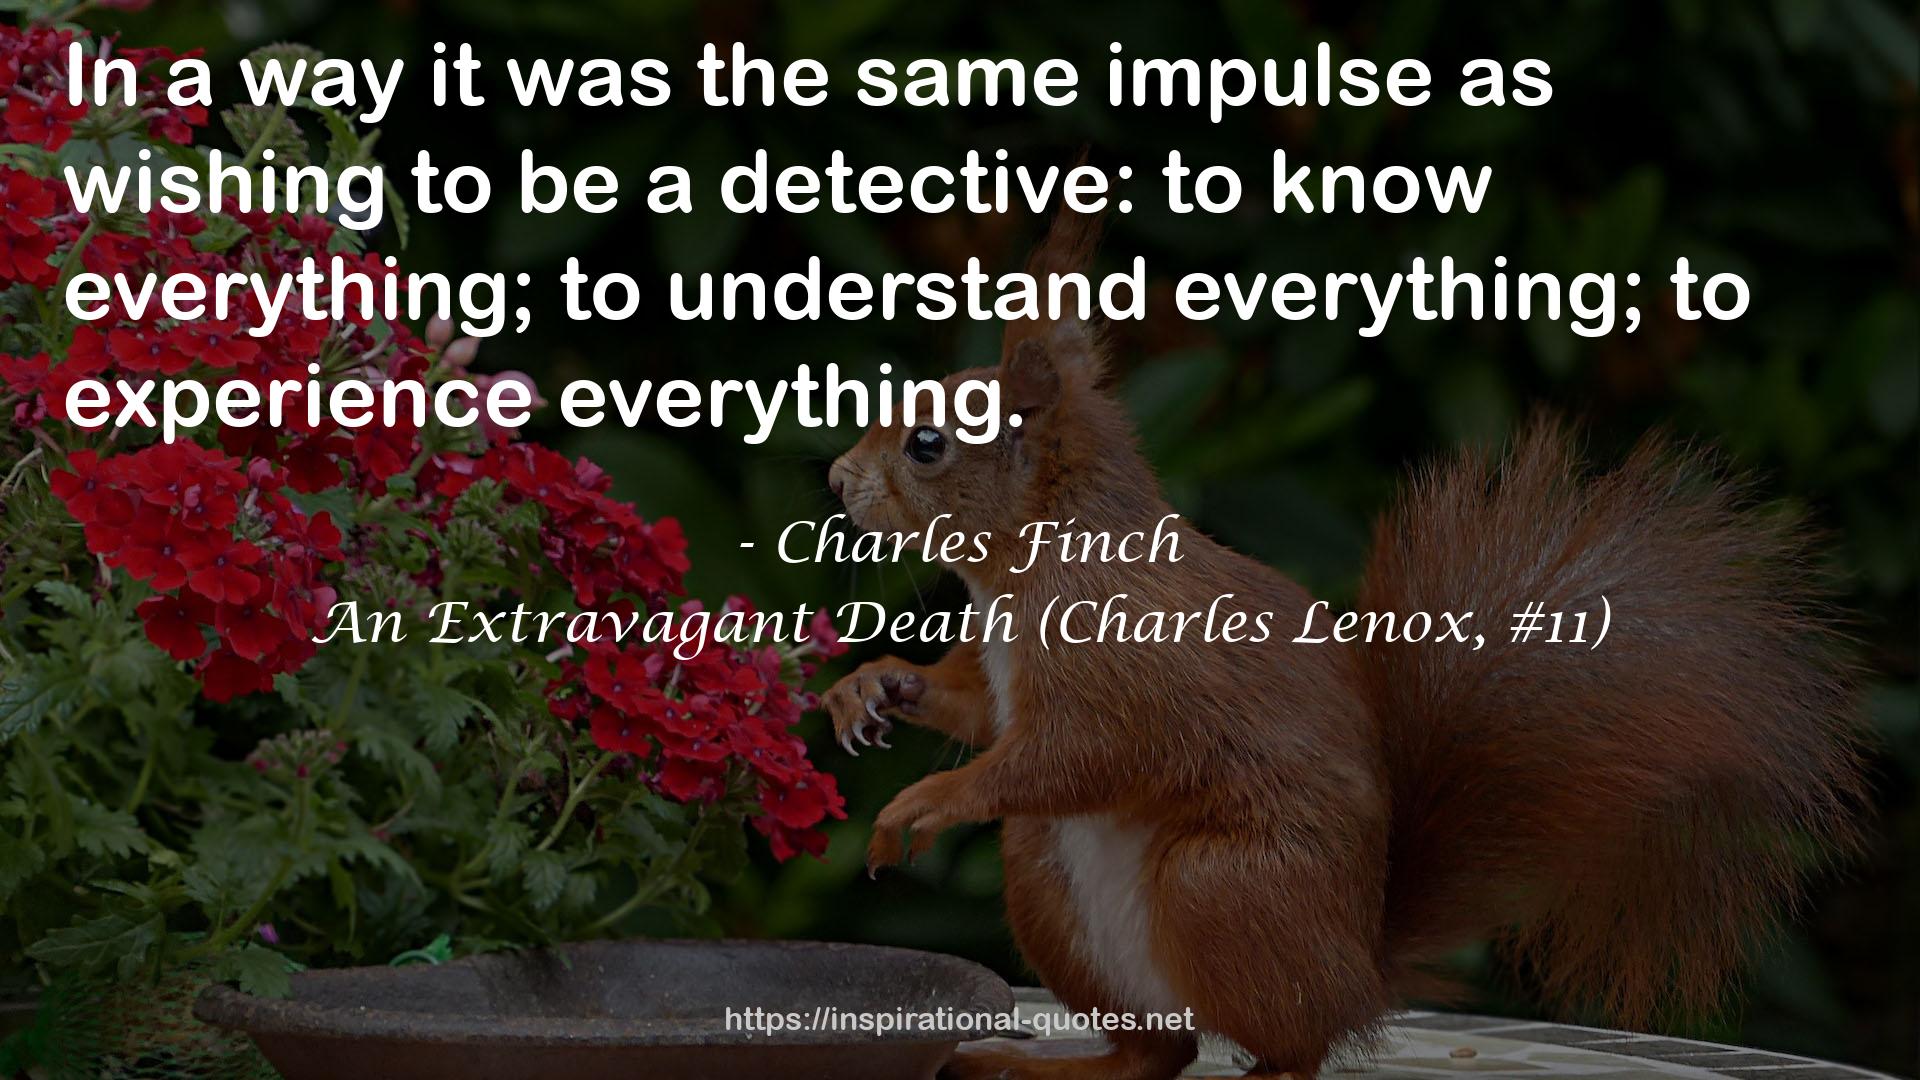 An Extravagant Death (Charles Lenox, #11) QUOTES